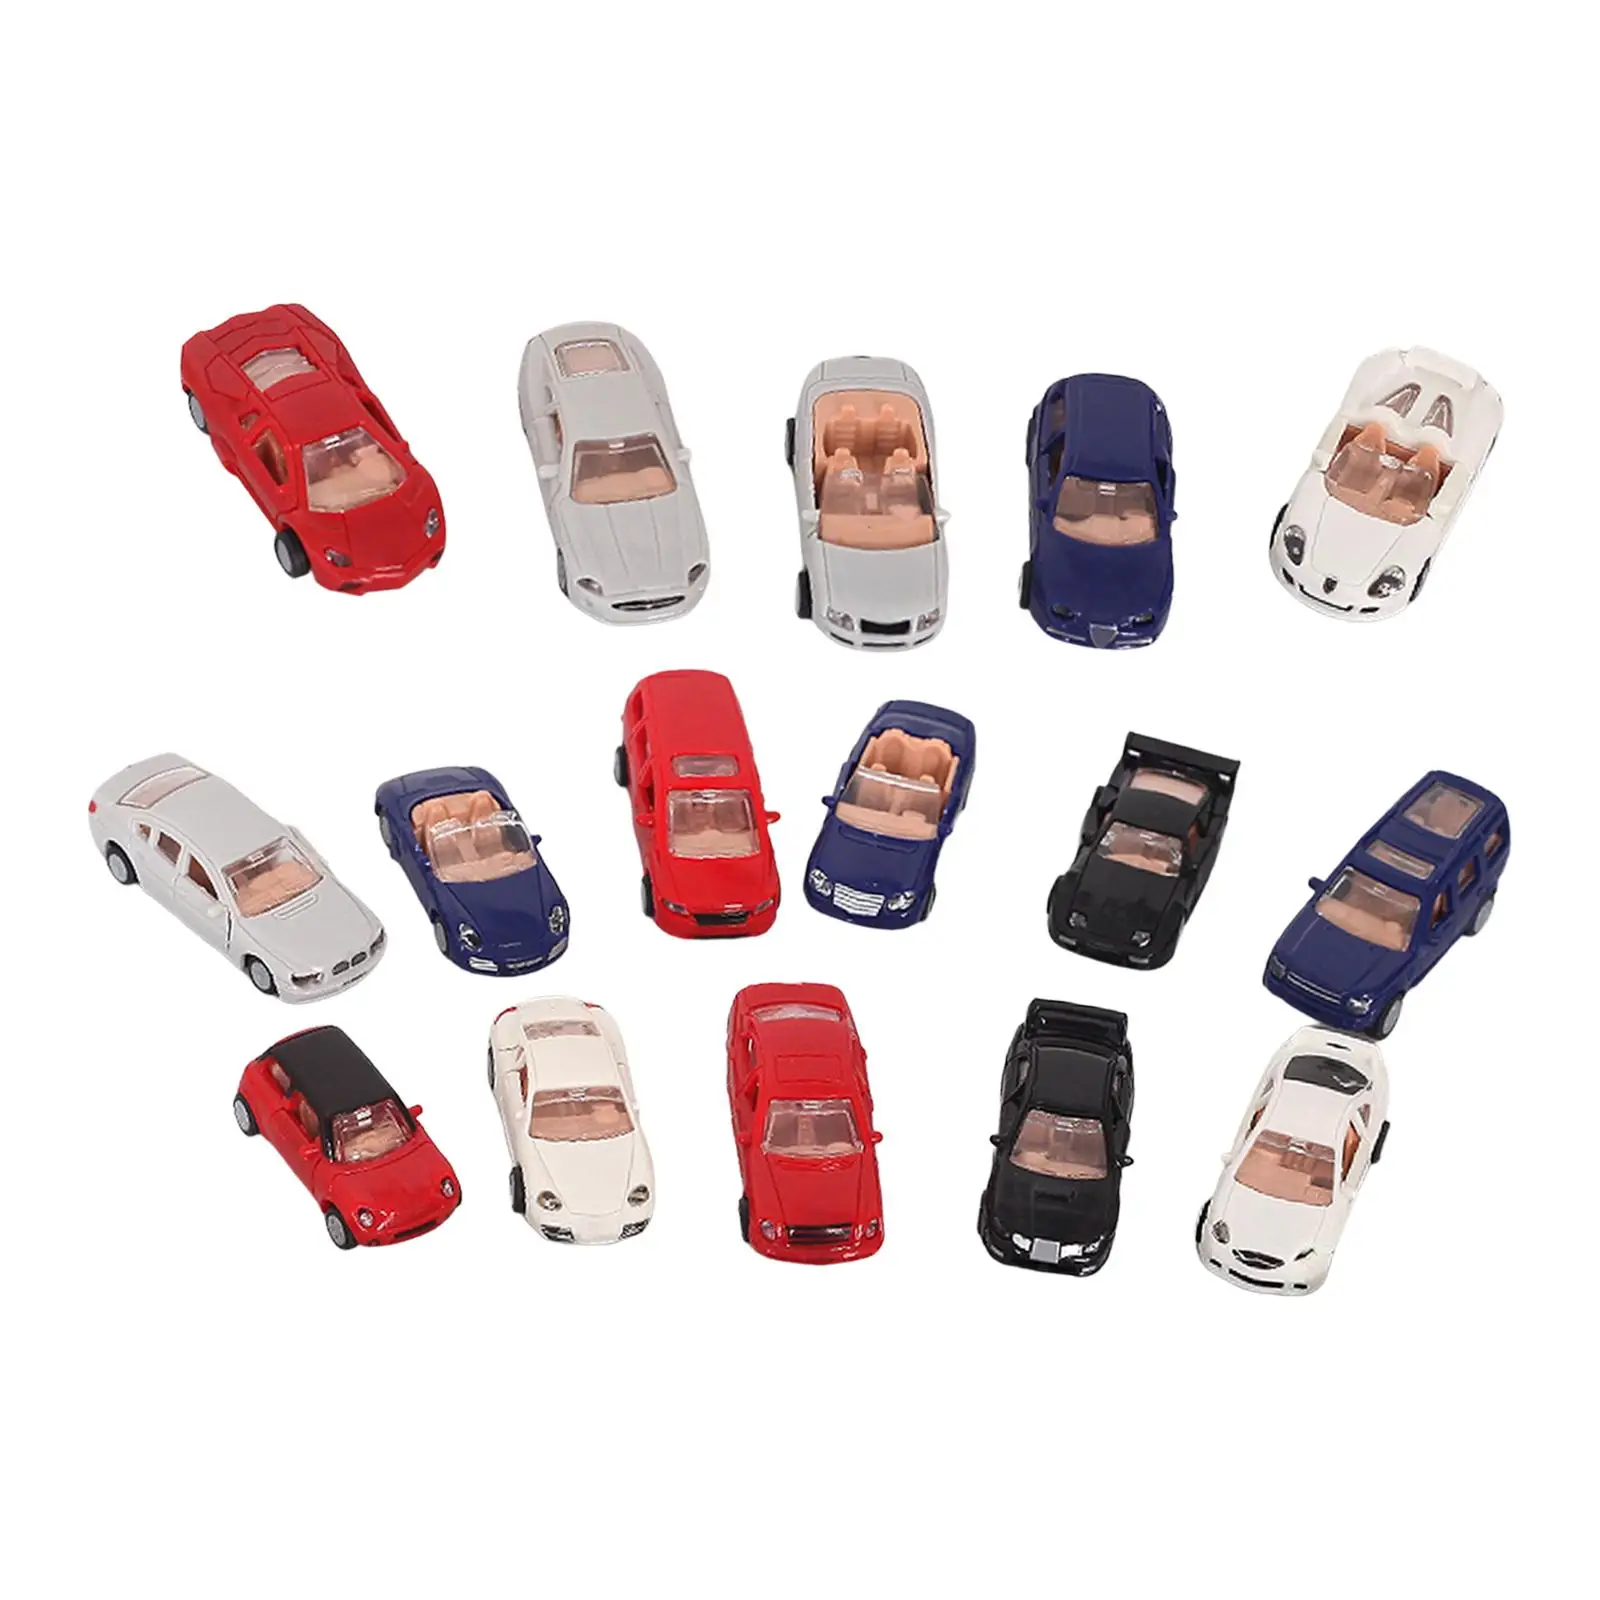 16 Pieces Car Model Collection Collectible Gifts Puzzle Fine Details Construction Micro Landscape Children Toy Vehicle Model Toy